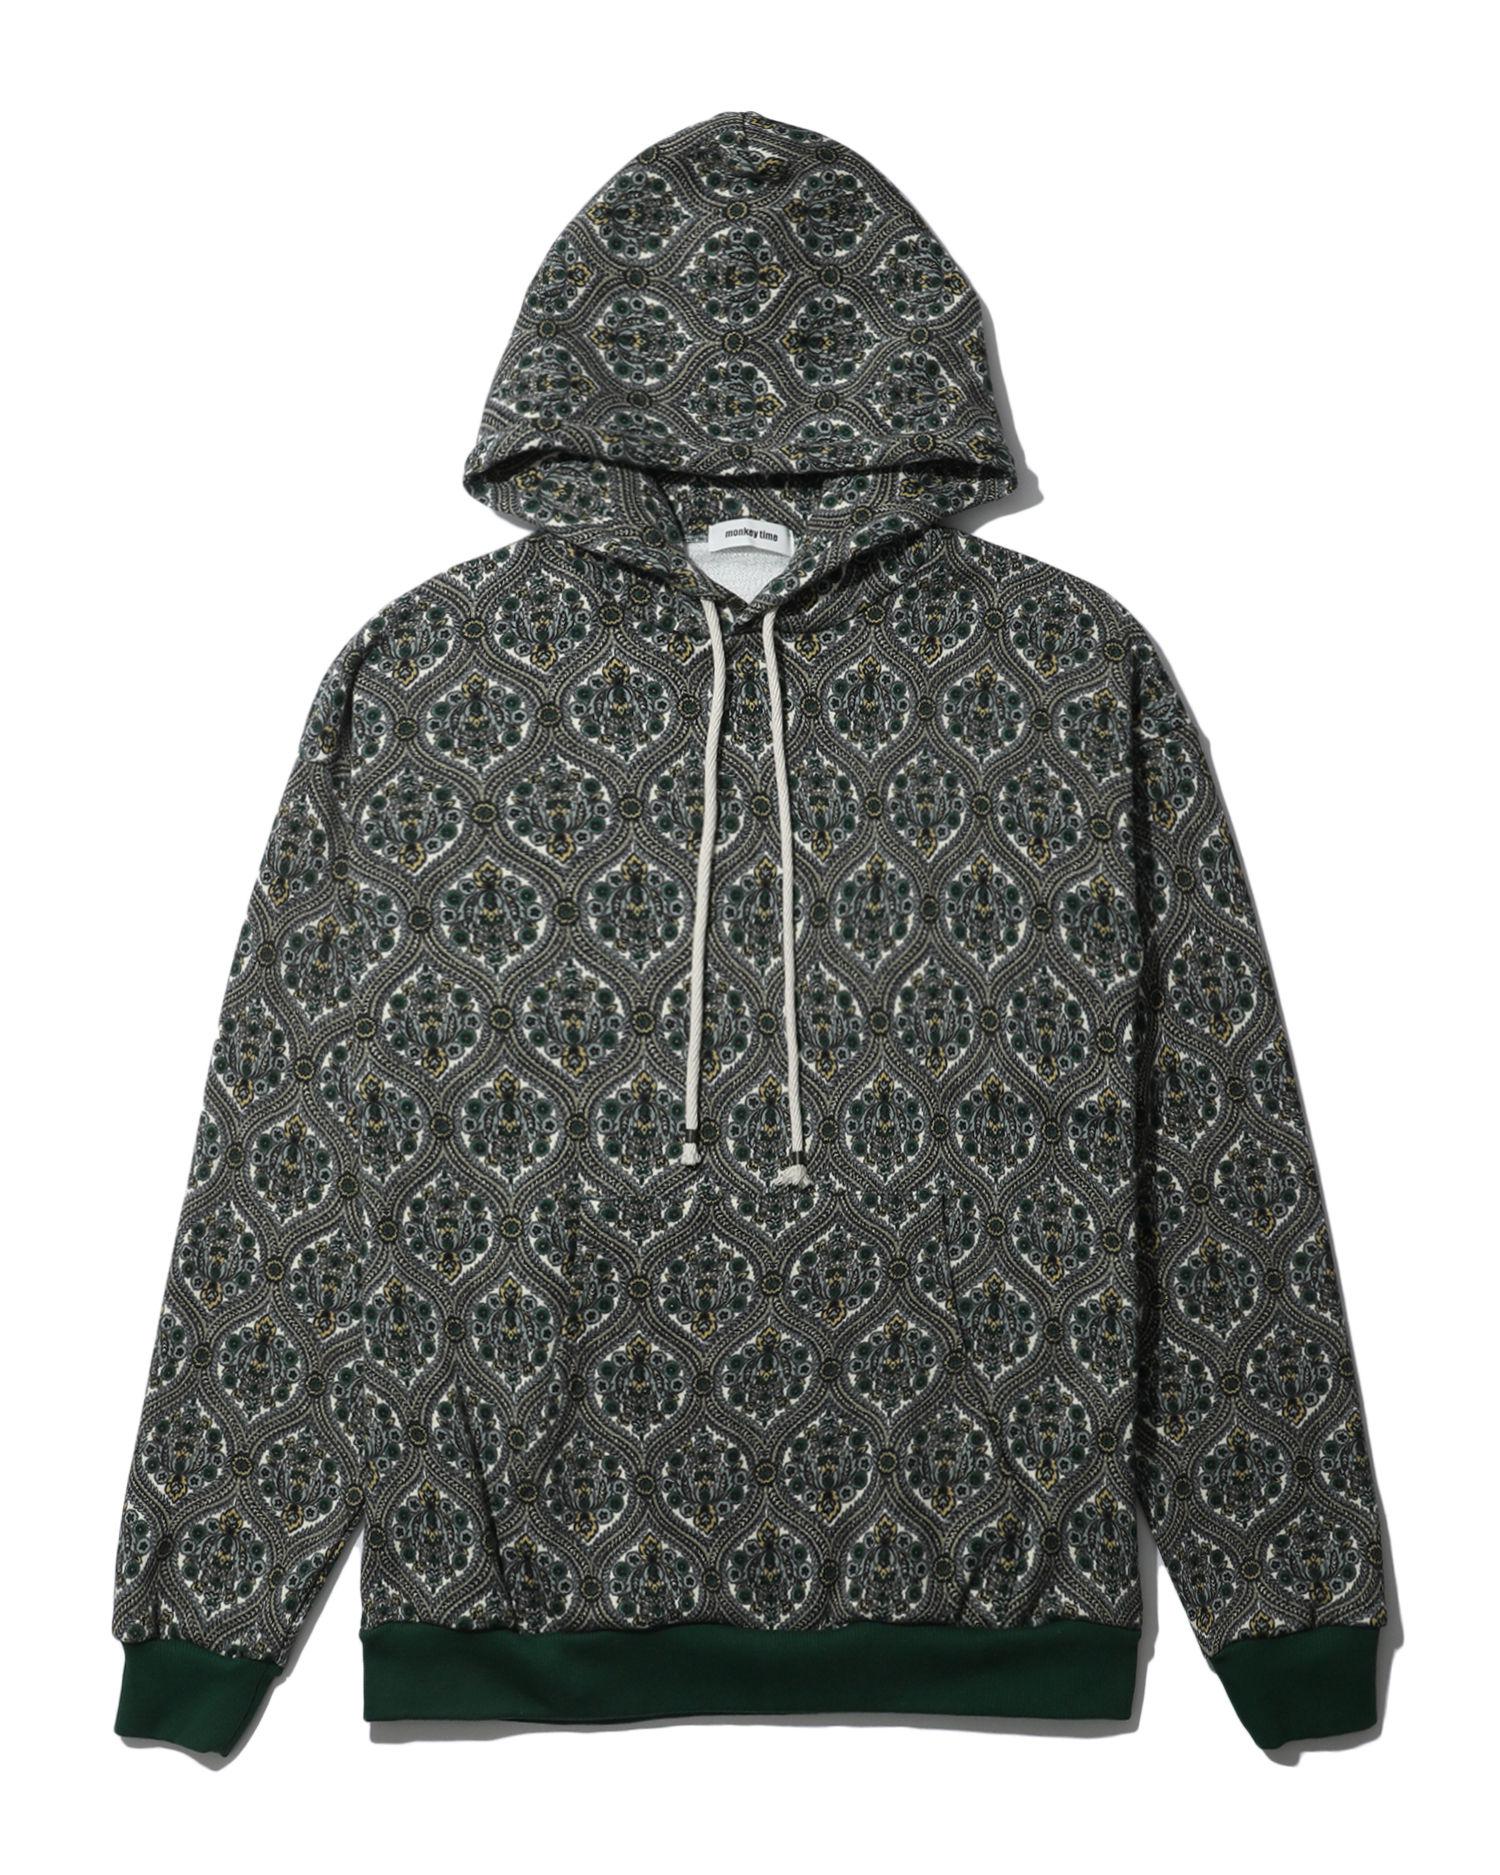 Patterned hoodie by BEAUTY&YOUTH MONKEY TIME